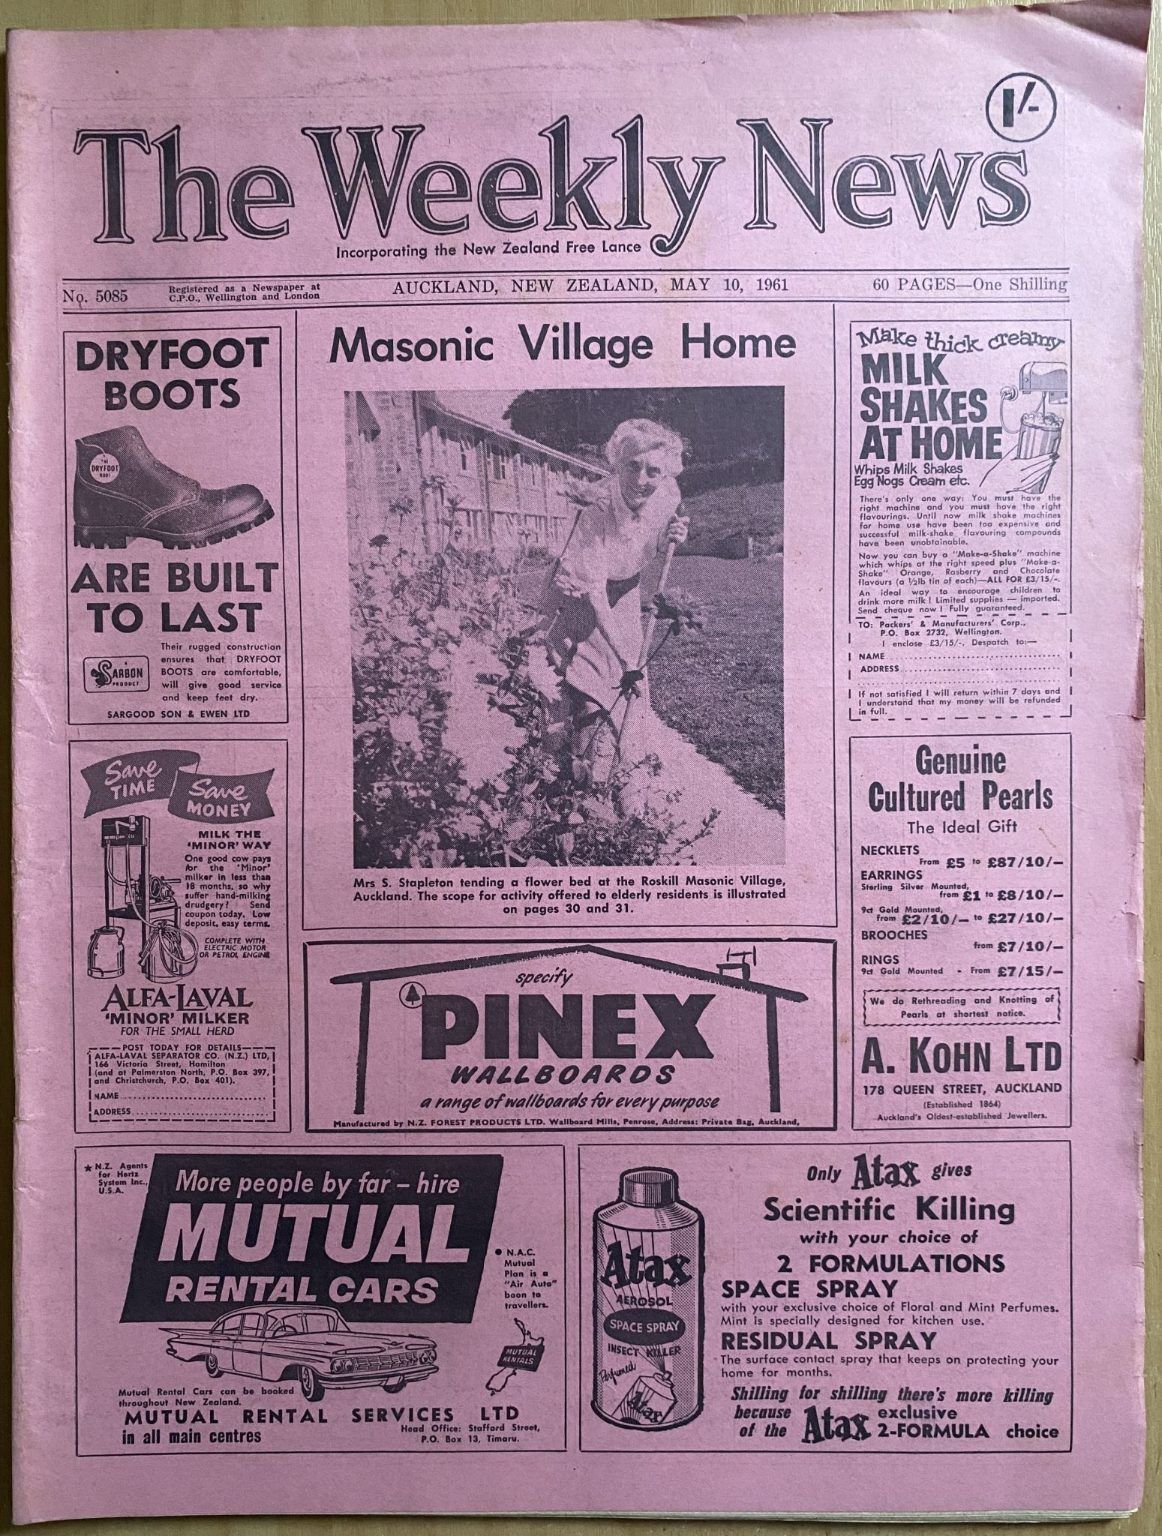 OLD NEWSPAPER: The Weekly News, No. 5085, 10 May 1961